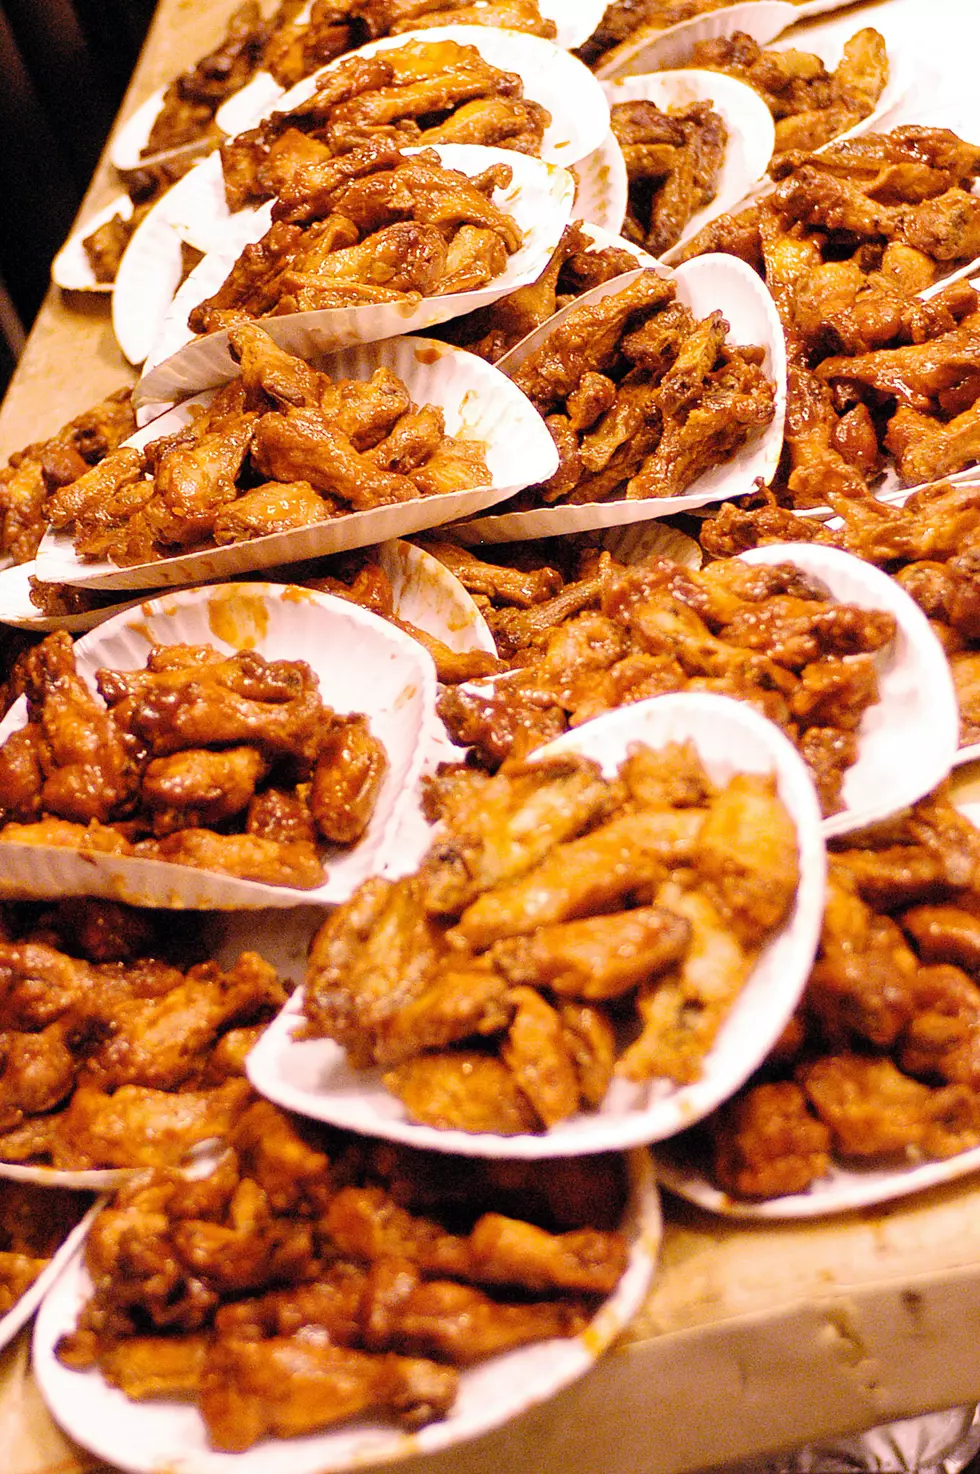 Buffalo Dominates the List of Best Places to Get Wings in New York [VIDEO]